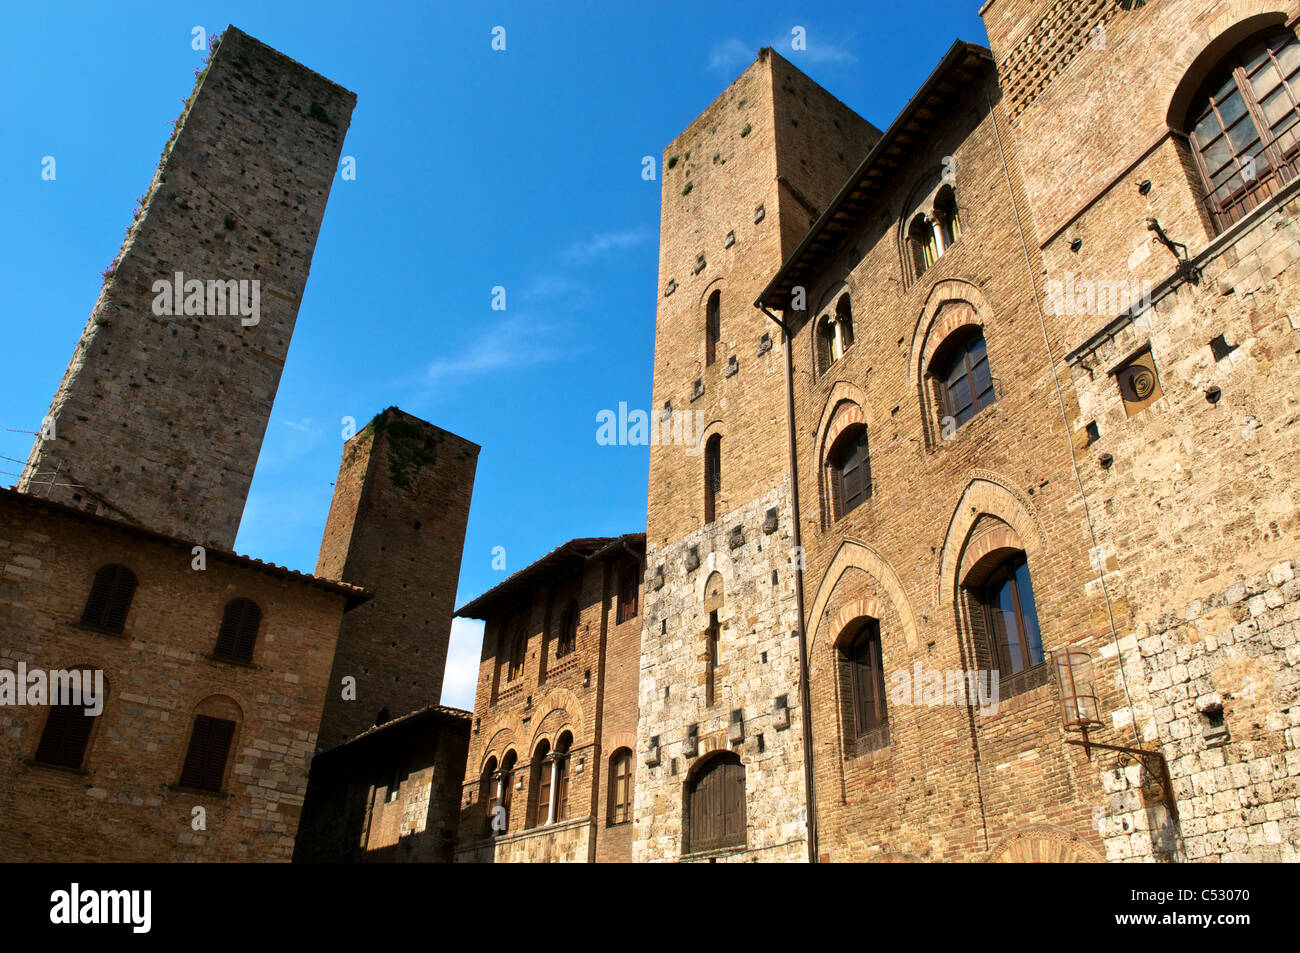 Volterra is a town in the Tuscany region of Italy. Stock Photo